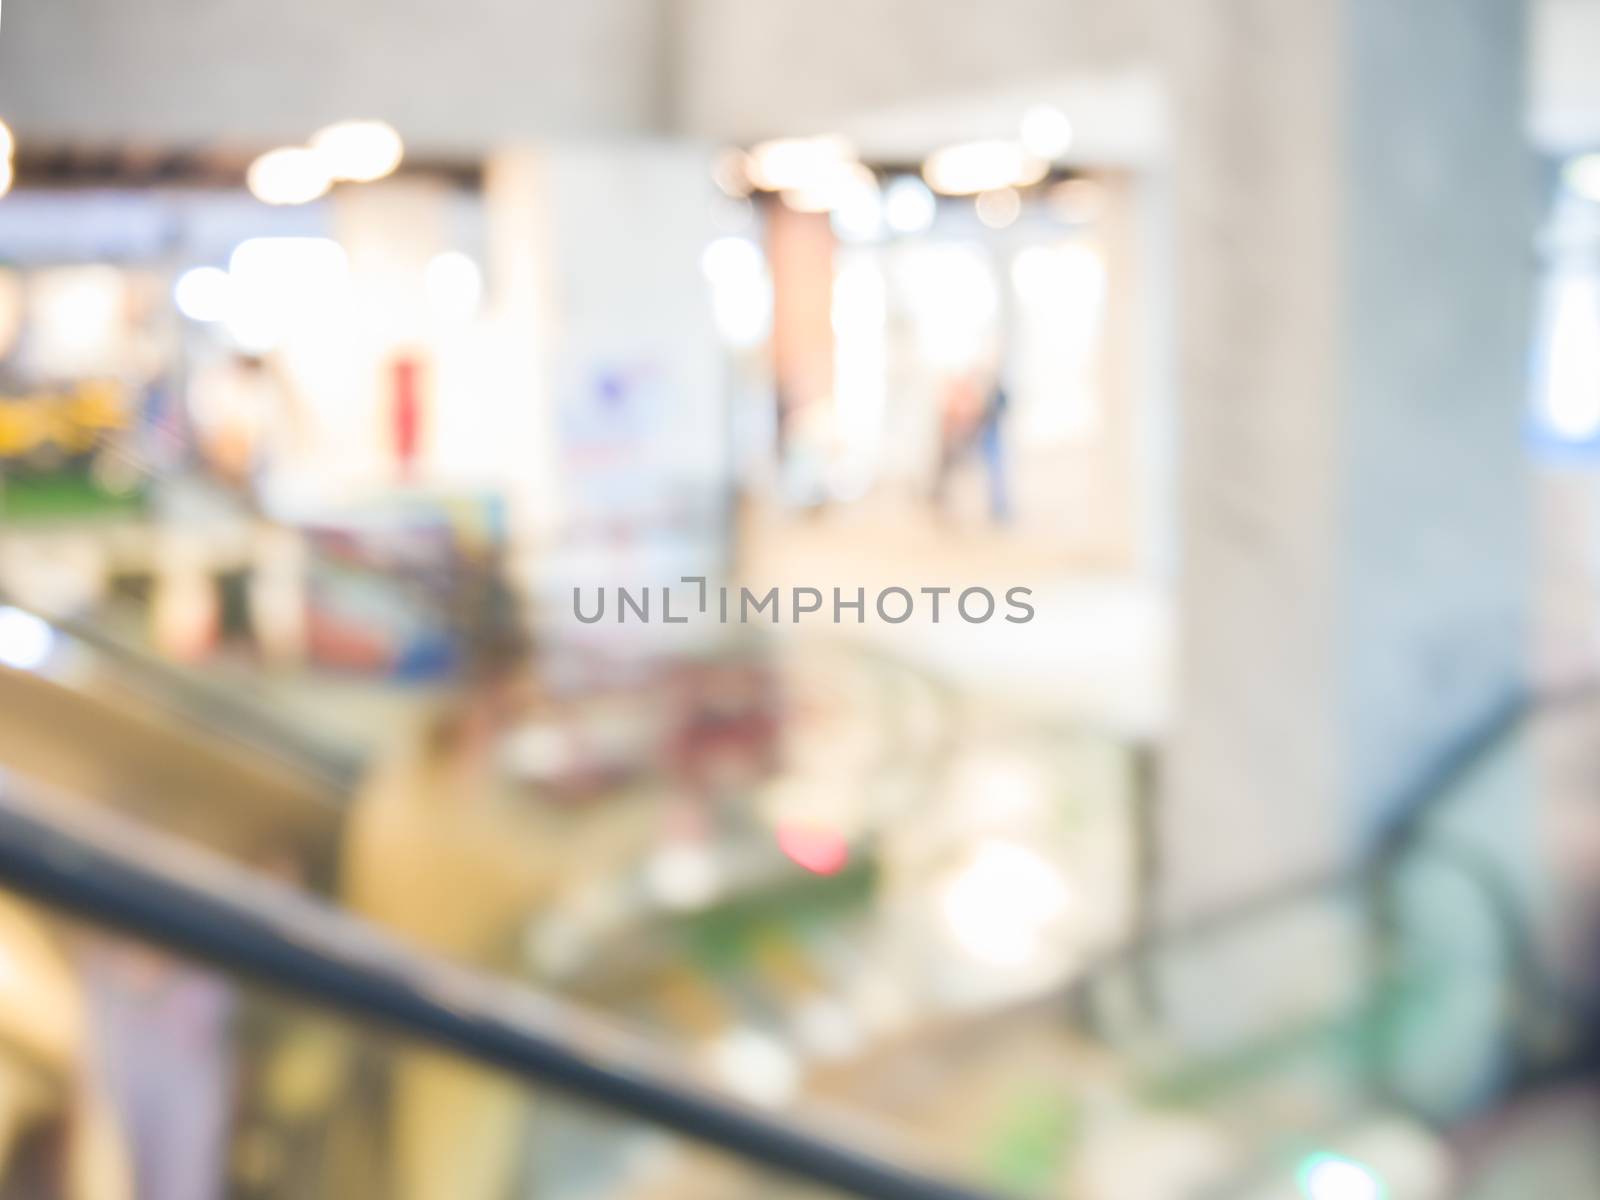 blurred escalator in shopping mall as background